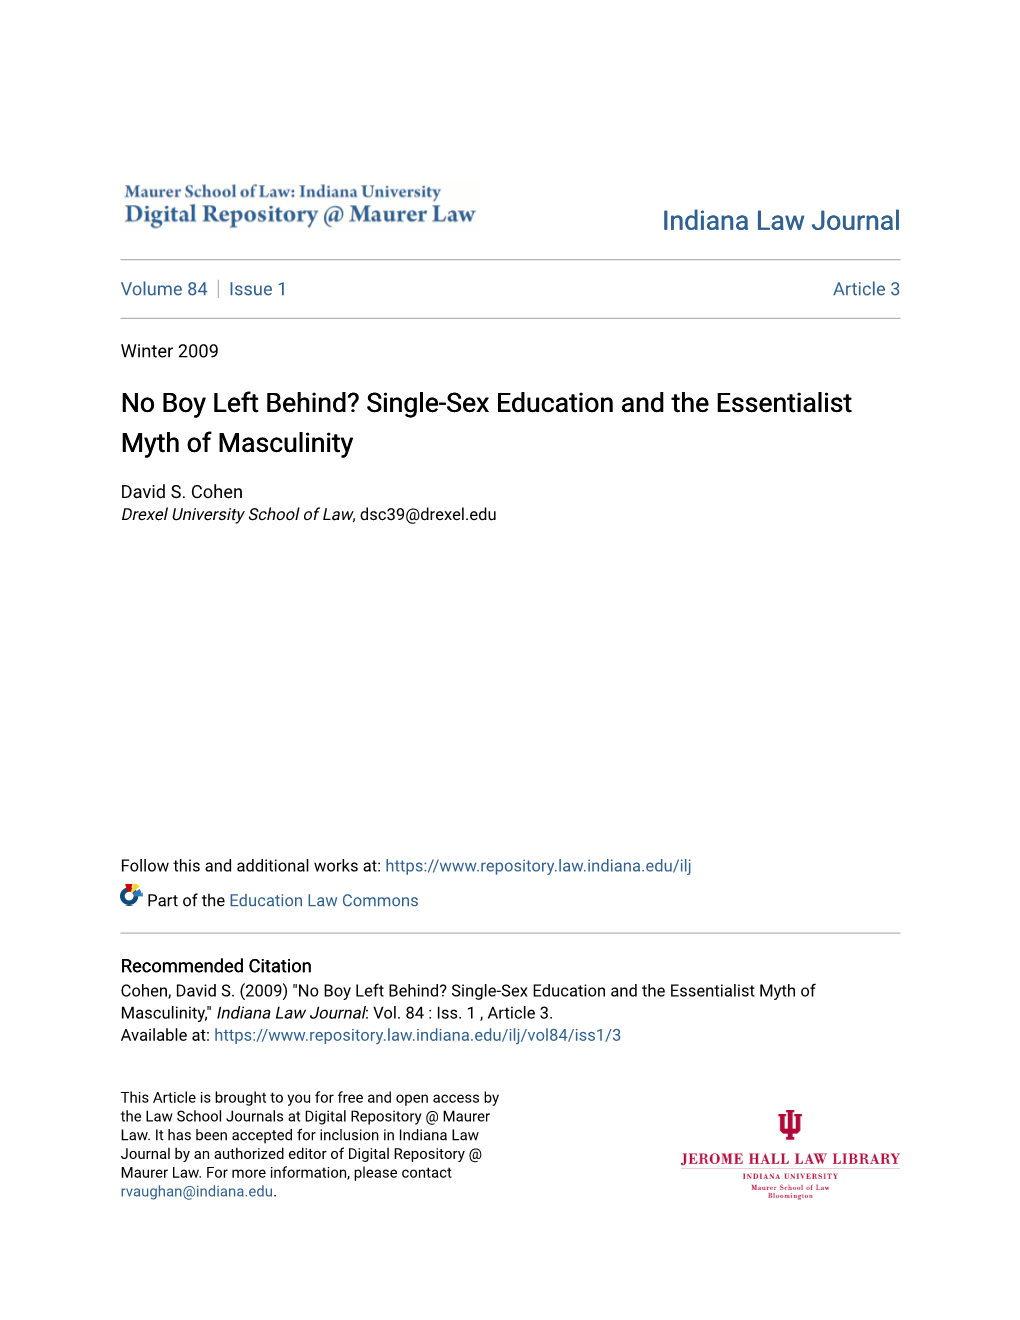 Single-Sex Education and the Essentialist Myth of Masculinity